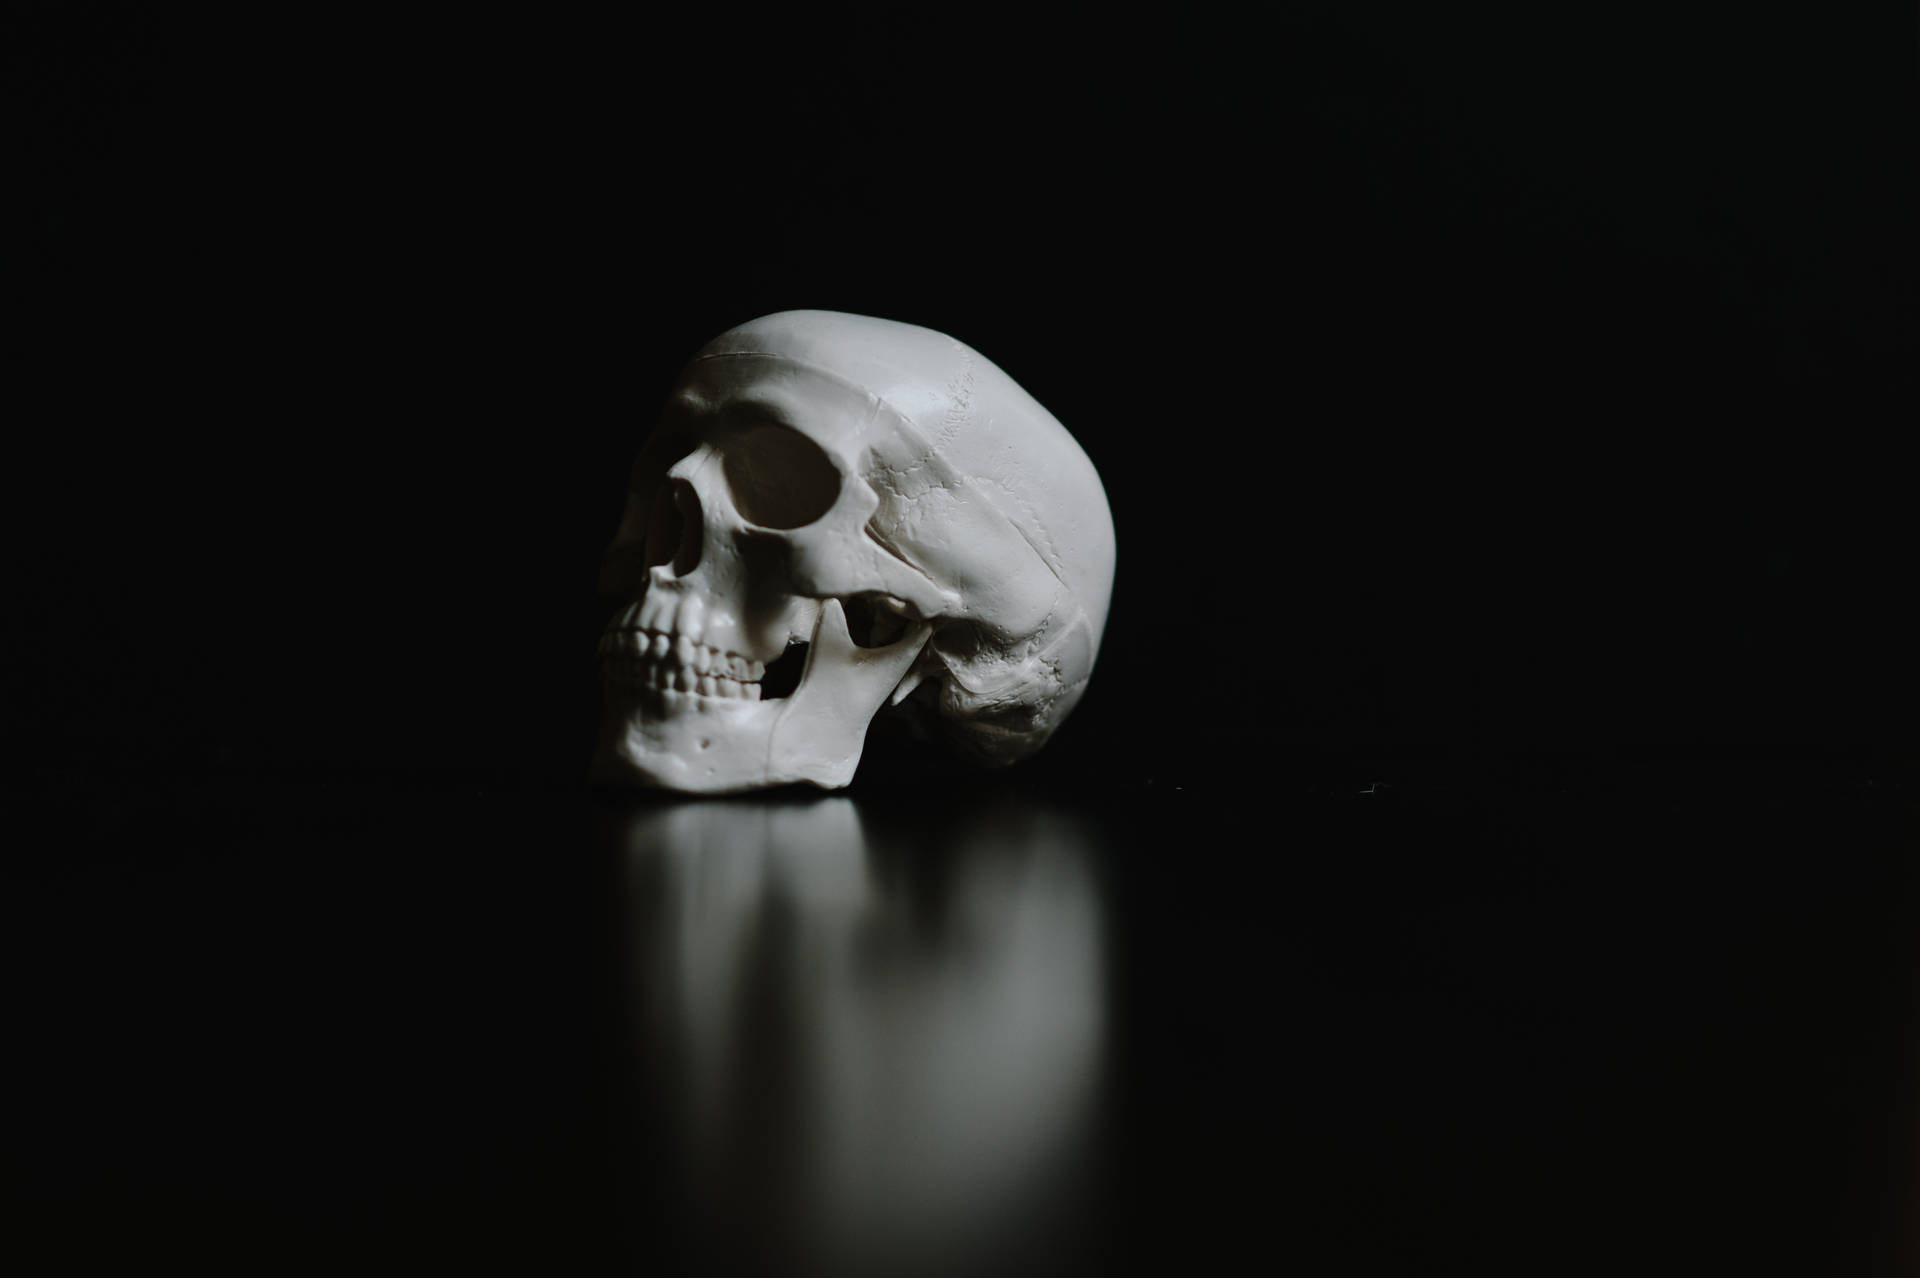 4256X2832 Skull Wallpaper and Background